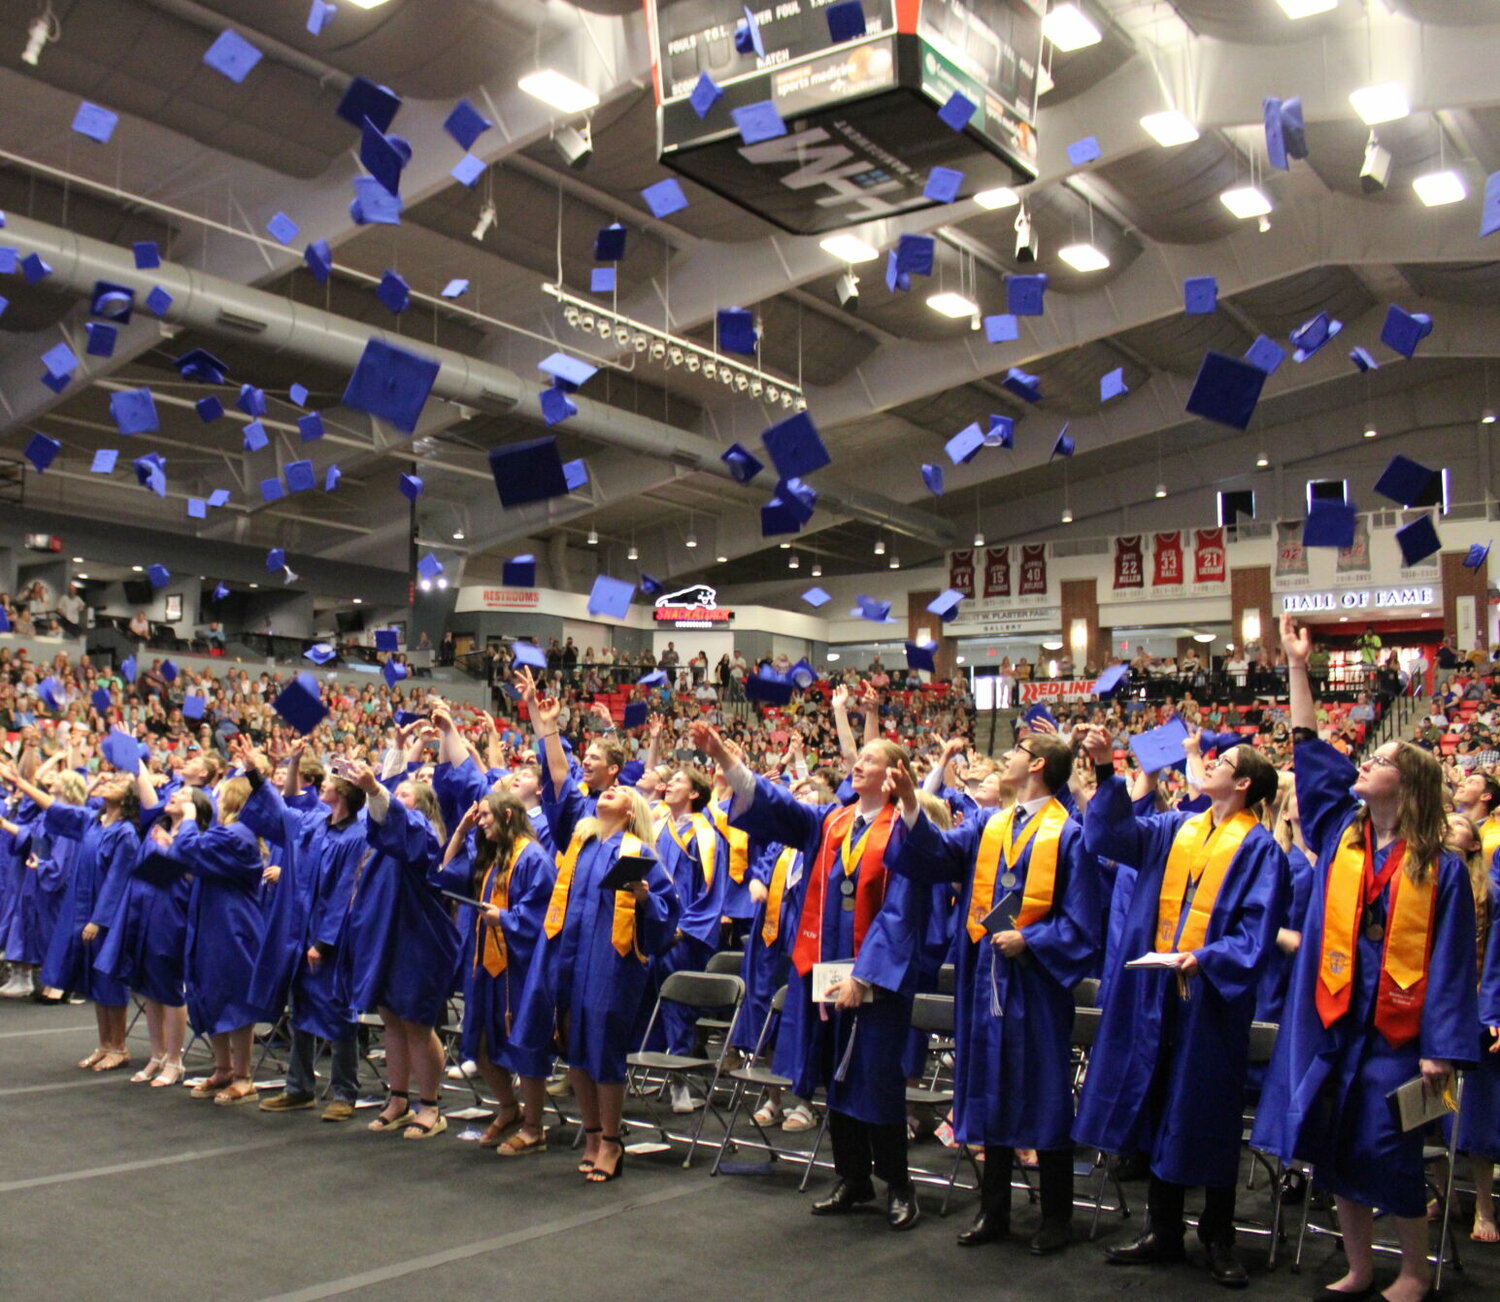 The Marshfield Bluejays class of 2023 let their caps and feathers fly as they celebrate graduation.